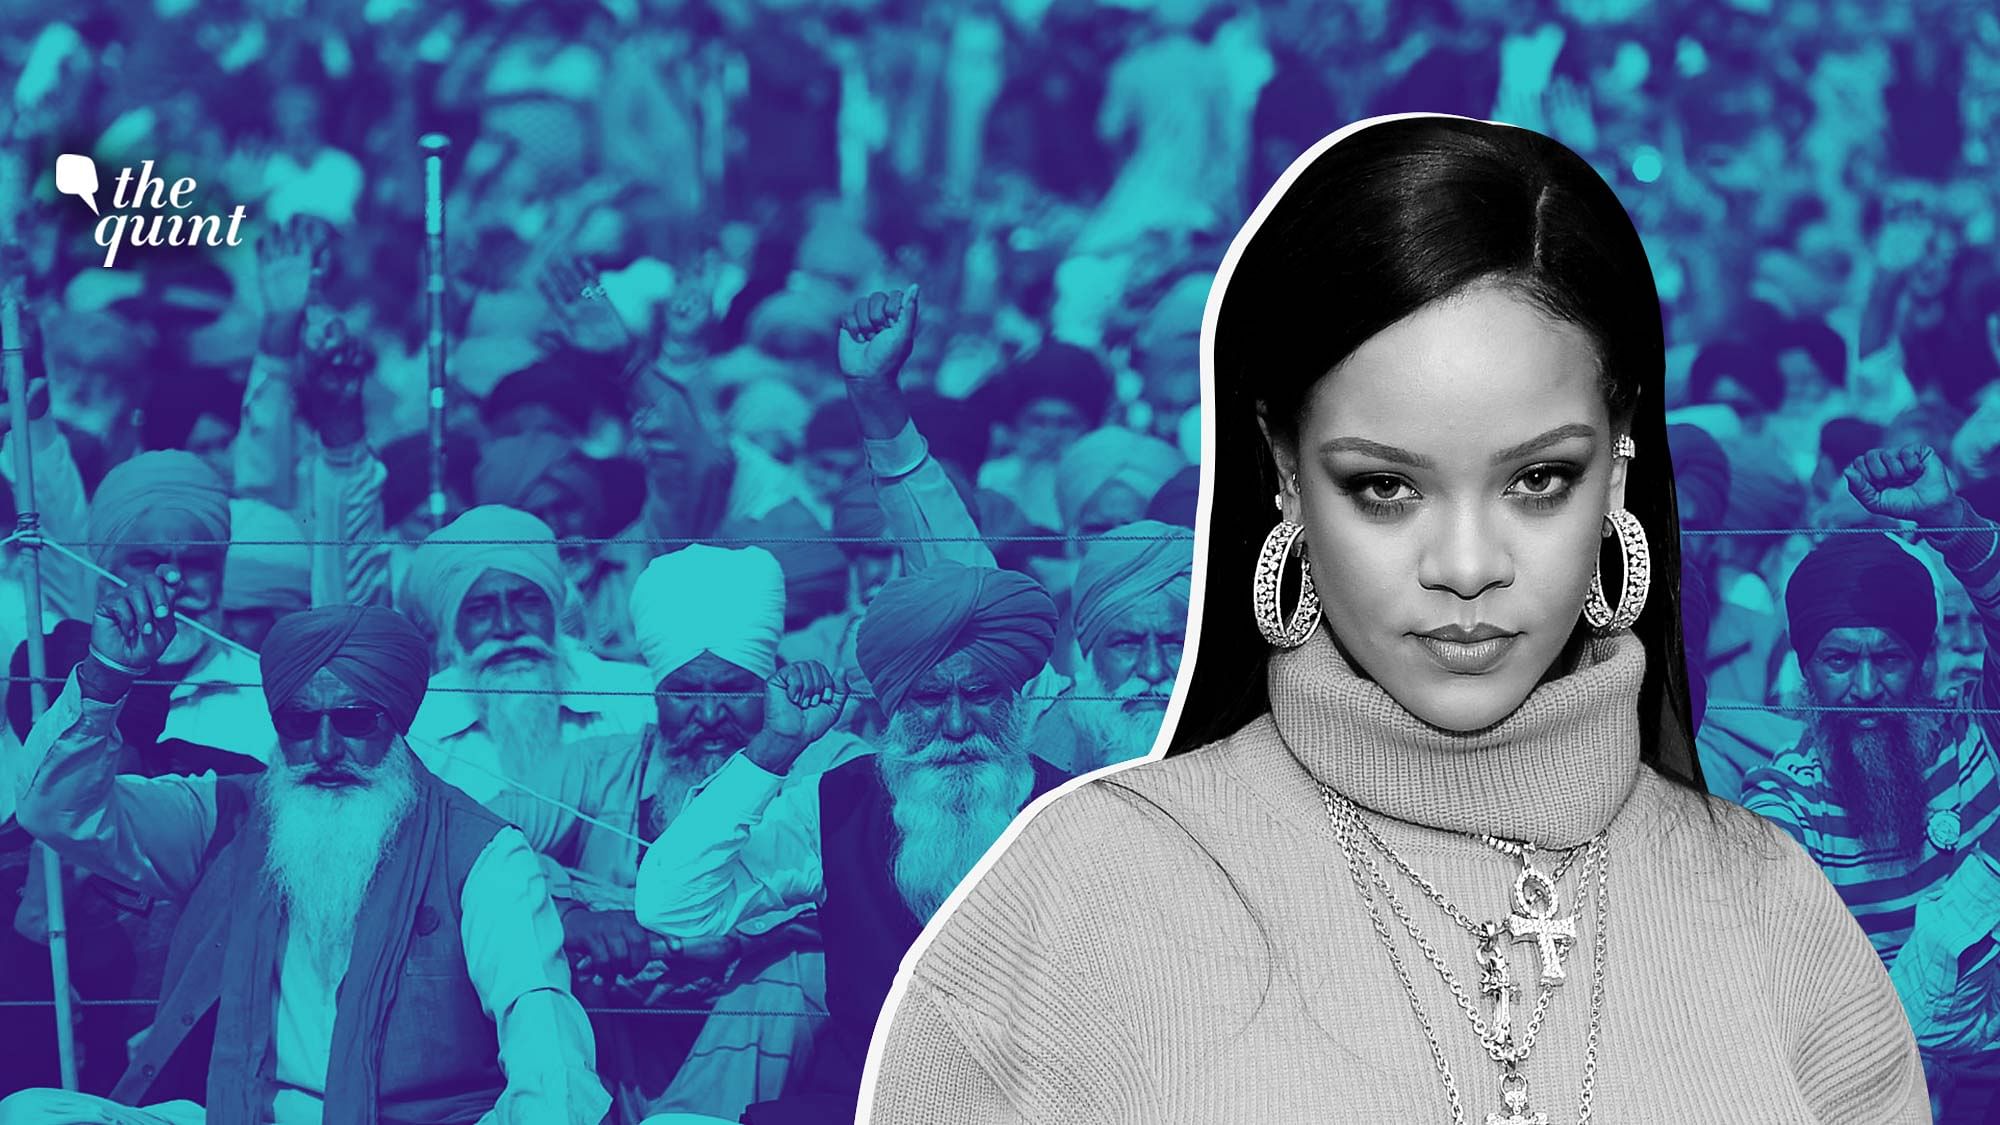 Image of Rihanna and farmers’ protests used for representational purposes.